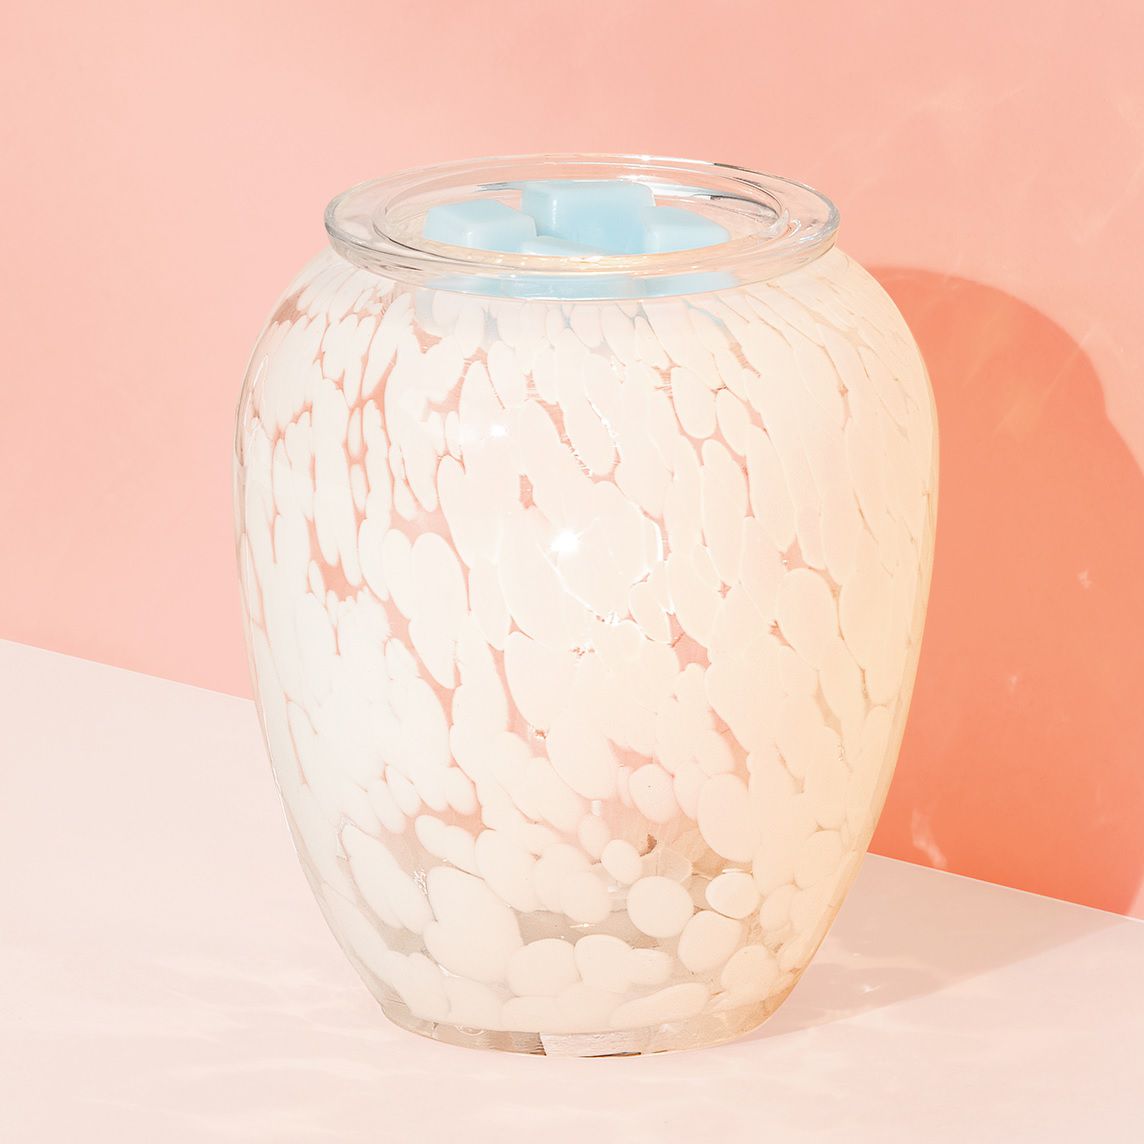 In The Clouds Scentsy Warmer Alt